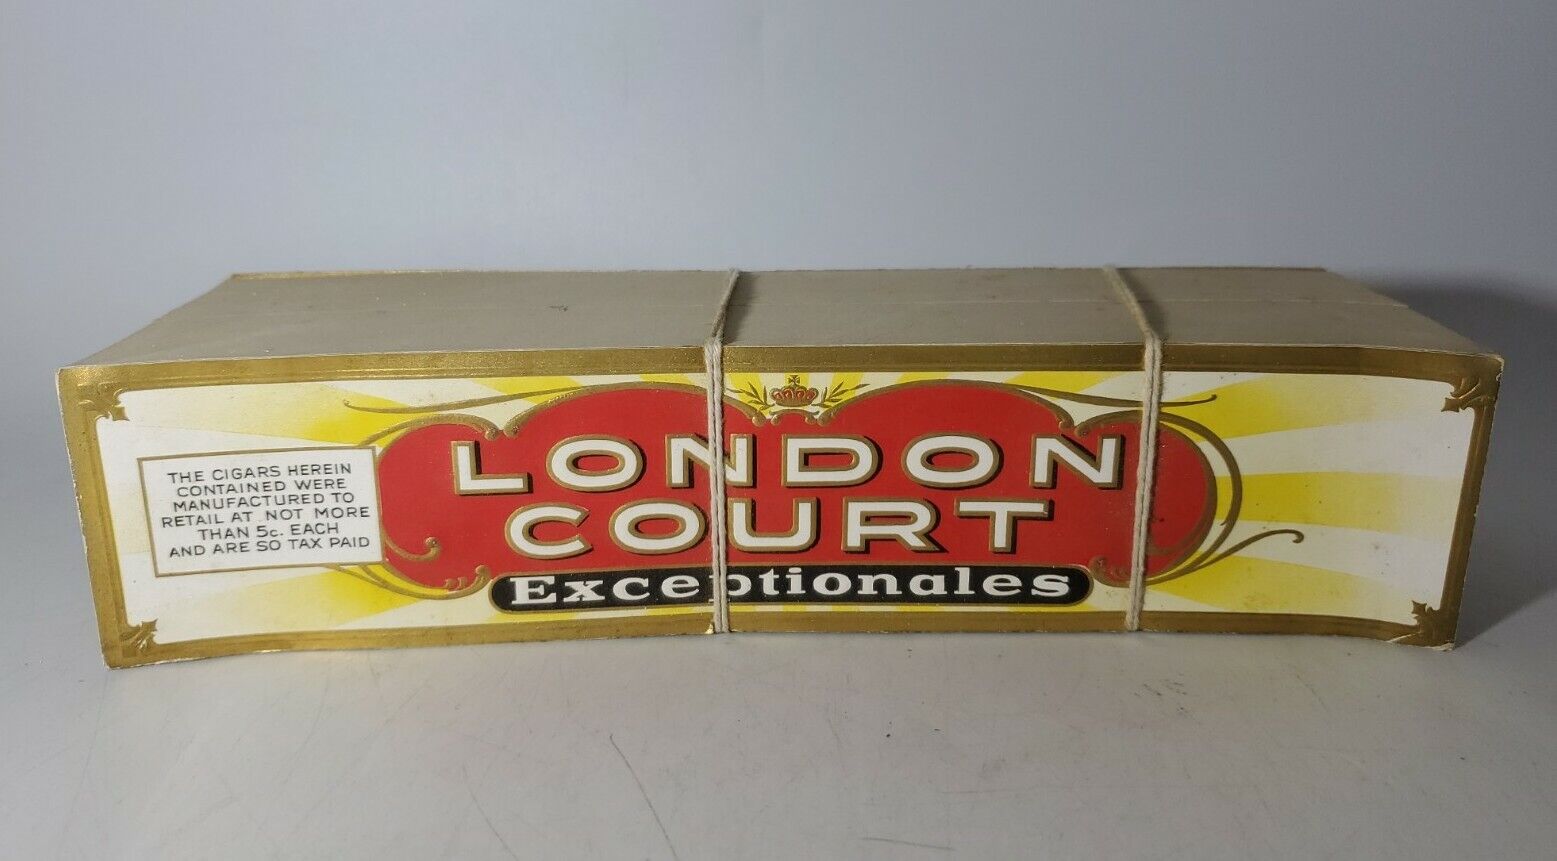 300 Vintage London Court Exceptionales Cigar Labels, Very Good Condition